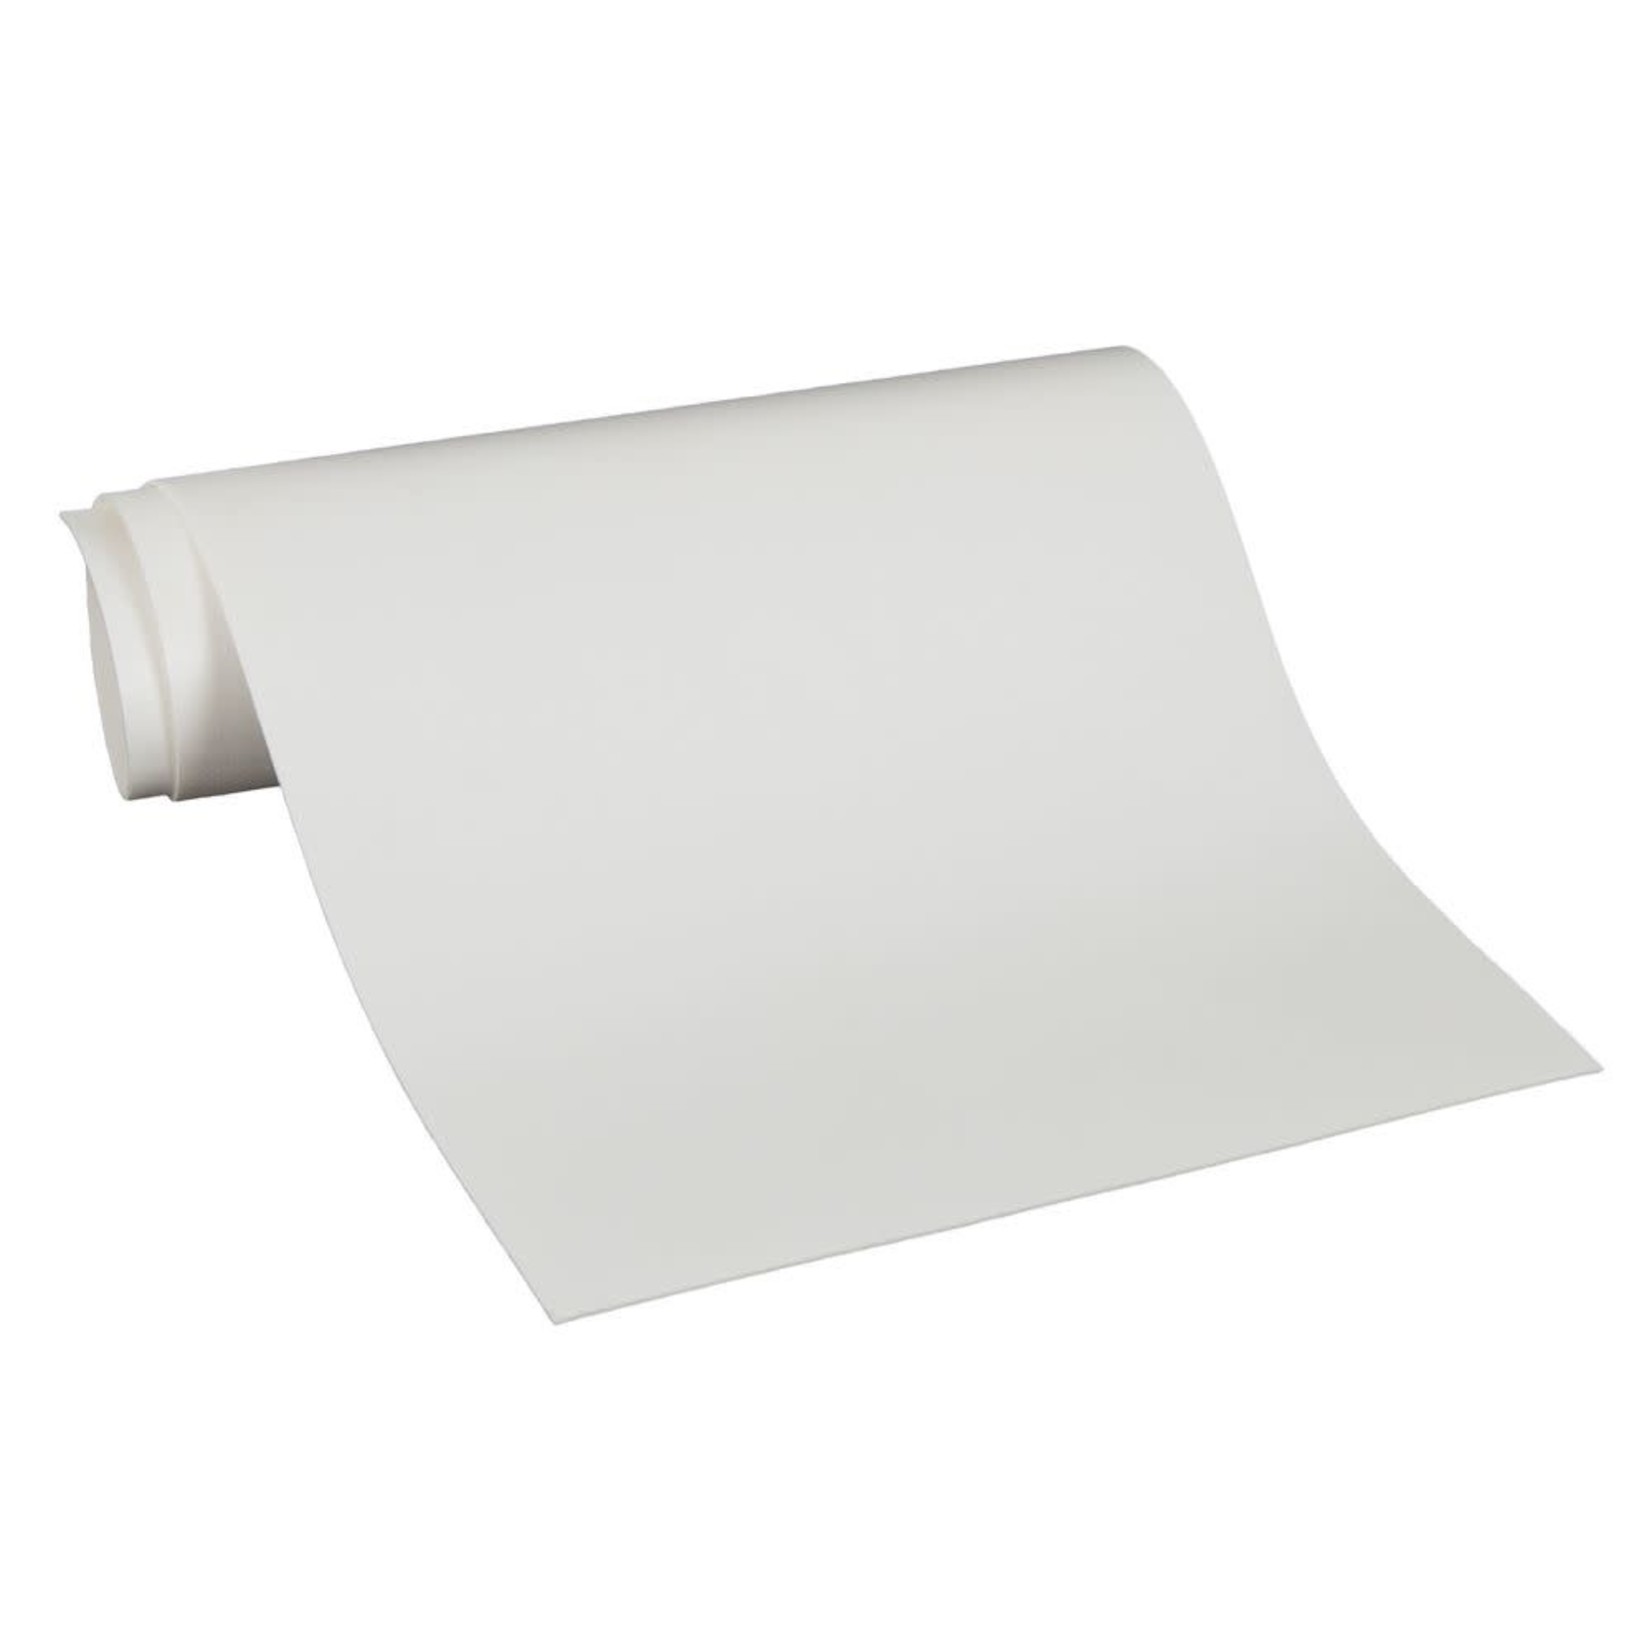 NRS NRS SUP Board PVC Fabric Pieces